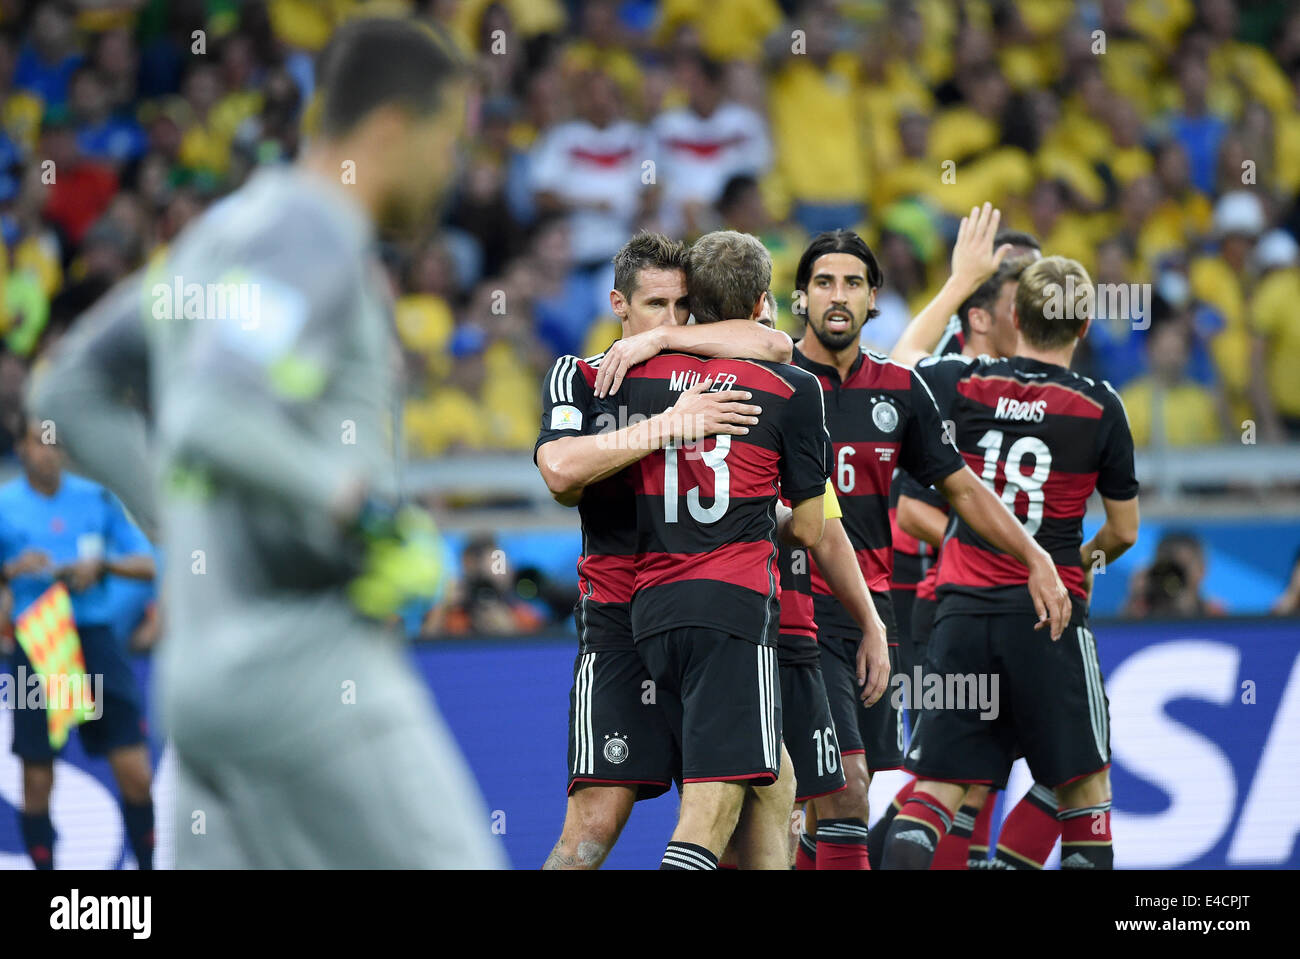 Belo Horizonte, Brazil. 08th July, 2014. Miroslav Klose (L-R) of Germany celebrates with his teammmates Thomas Mueller, Sami Khedira and Toni Kroos after scoring 0-2 goal during the FIFA World Cup 2014 semi-final soccer match between Brazil and Germany at Estadio Mineirao in Belo Horizonte, Brazil, 08 July 2014. Photo: Marcus Brandt/dpa/Alamy Live News Stock Photo